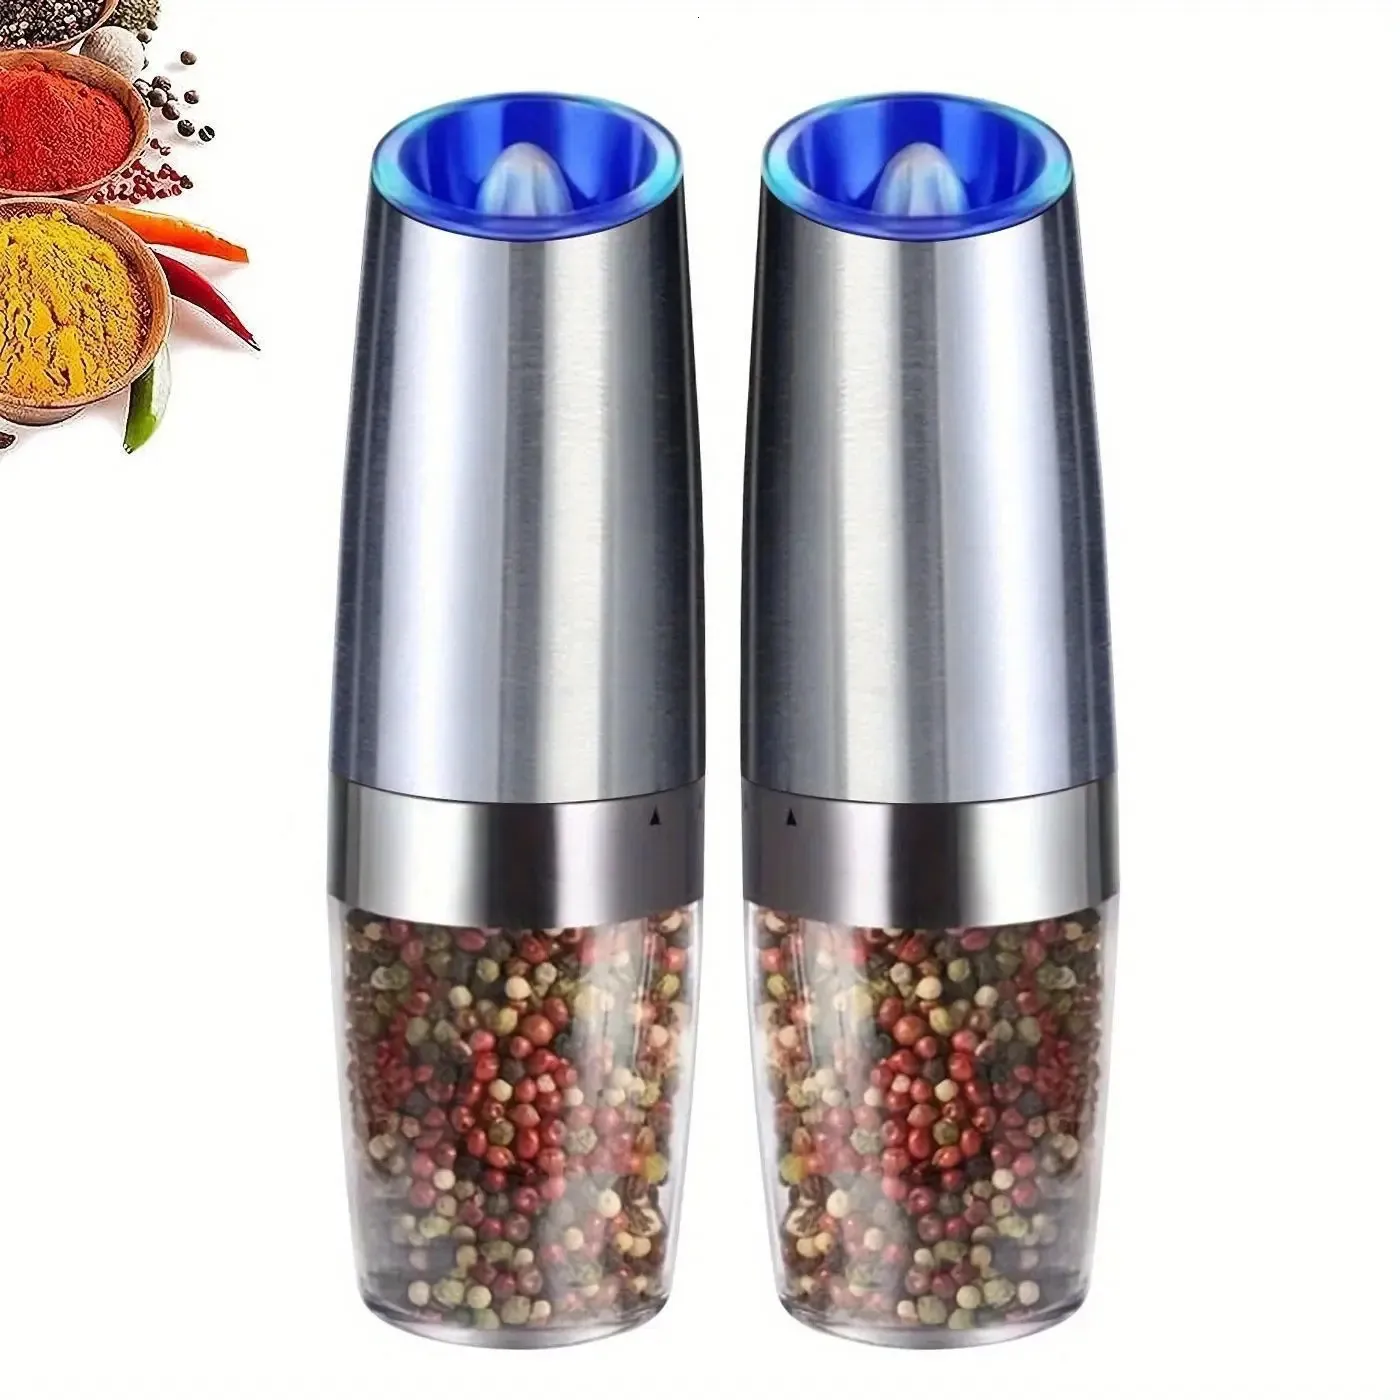 Mills Pepper Mill Electric Herb Coffee Grinder Automatic Gravity Induction Salt Shaker Grinders Machine Kitchen Spice Tools 231026